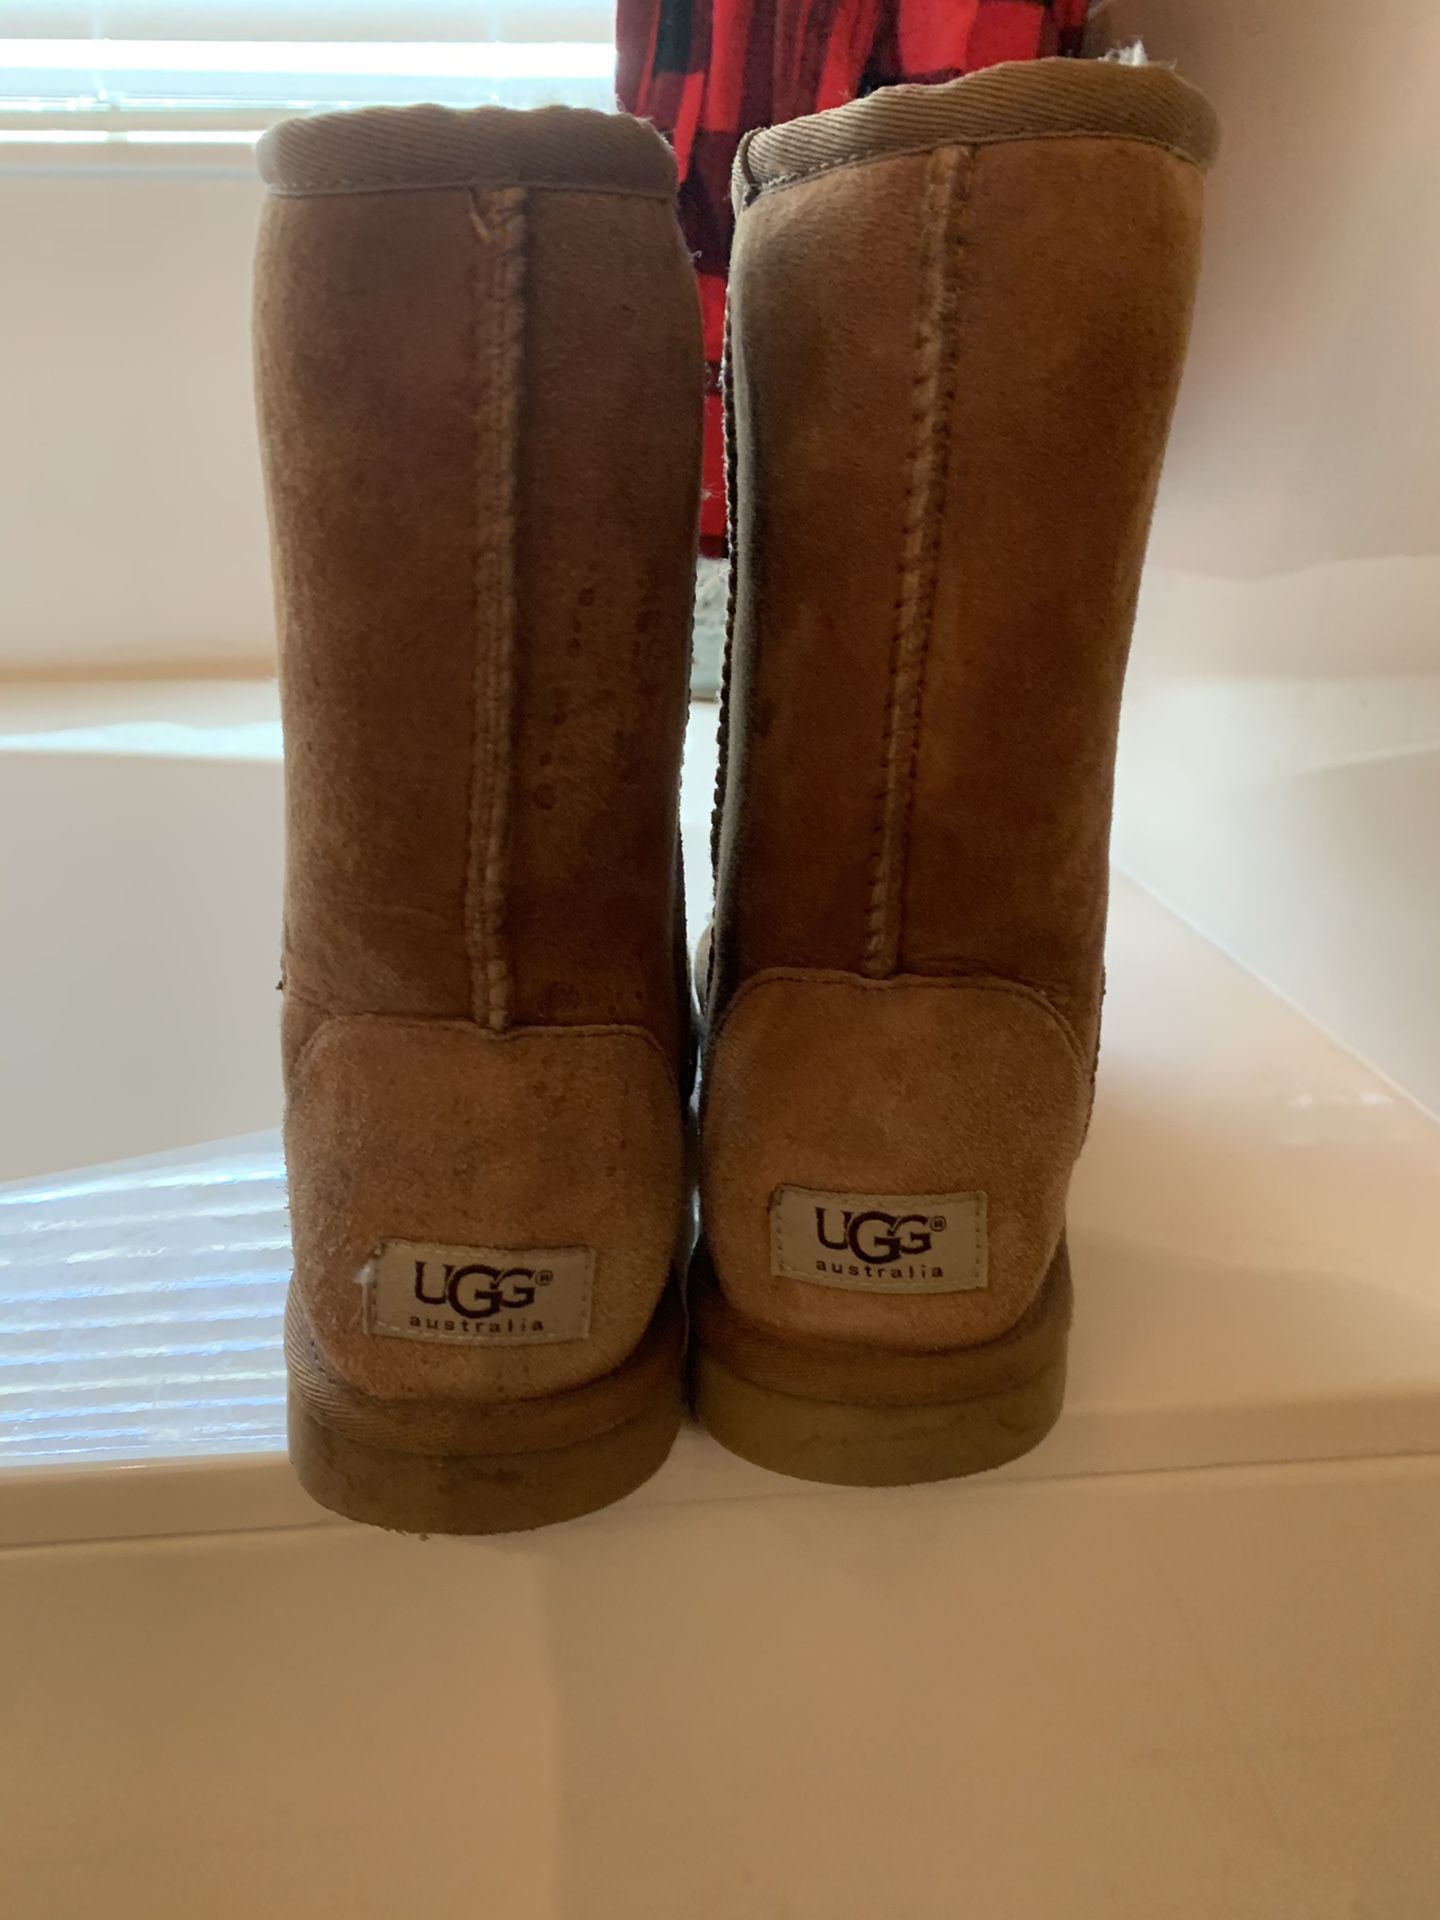 Uggs boots